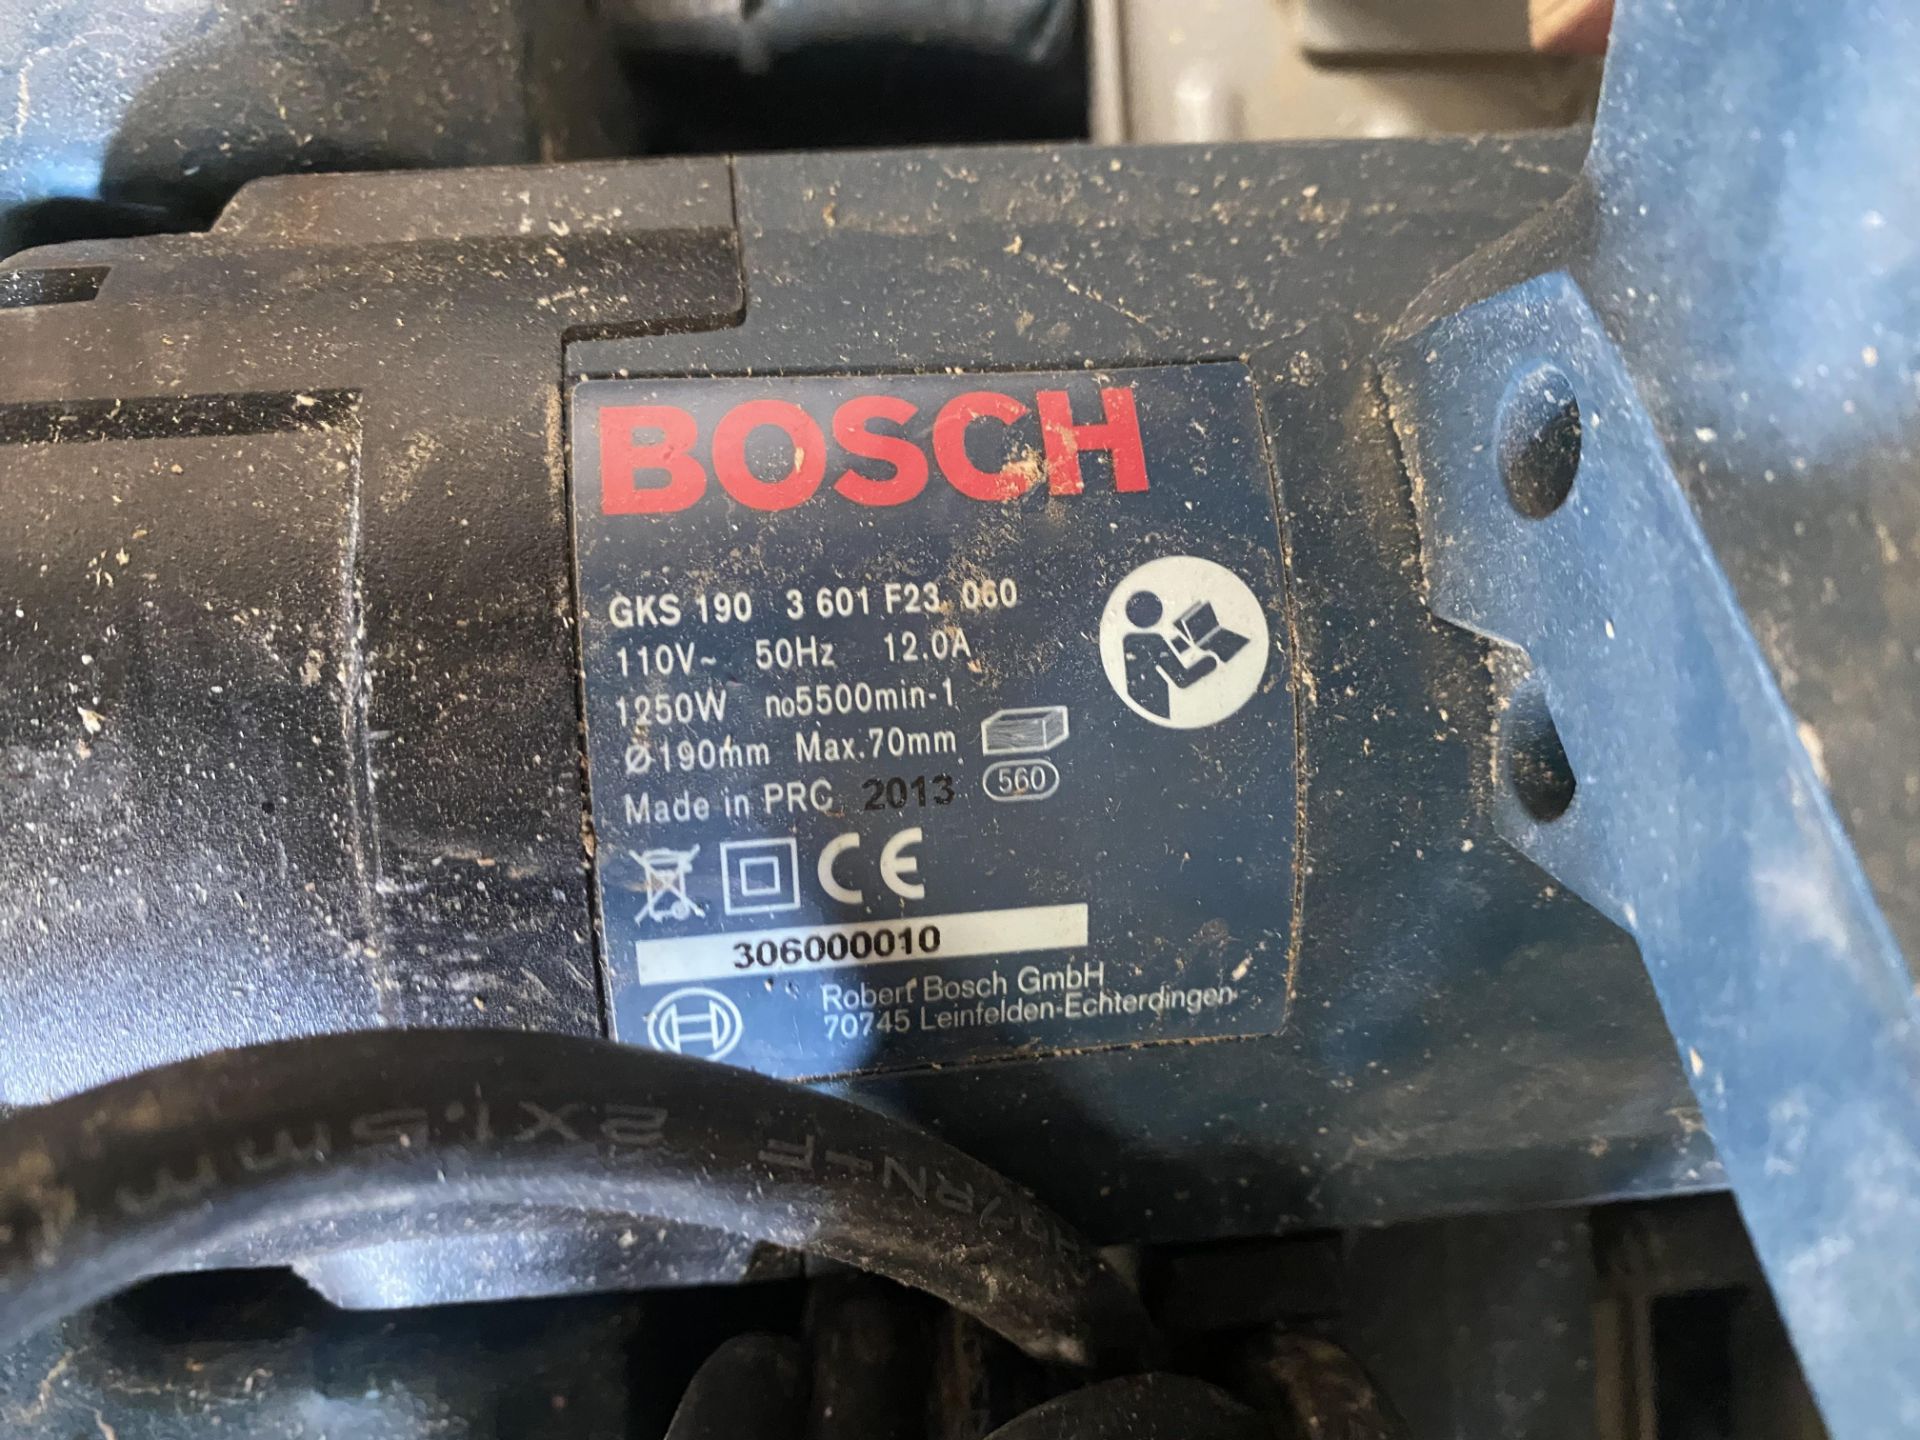 Bosch GKS 190 circular saw, 110v Located at Unit 54, Newcourt Barton, Clyst Road, Topsham, Exeter, - Image 2 of 3